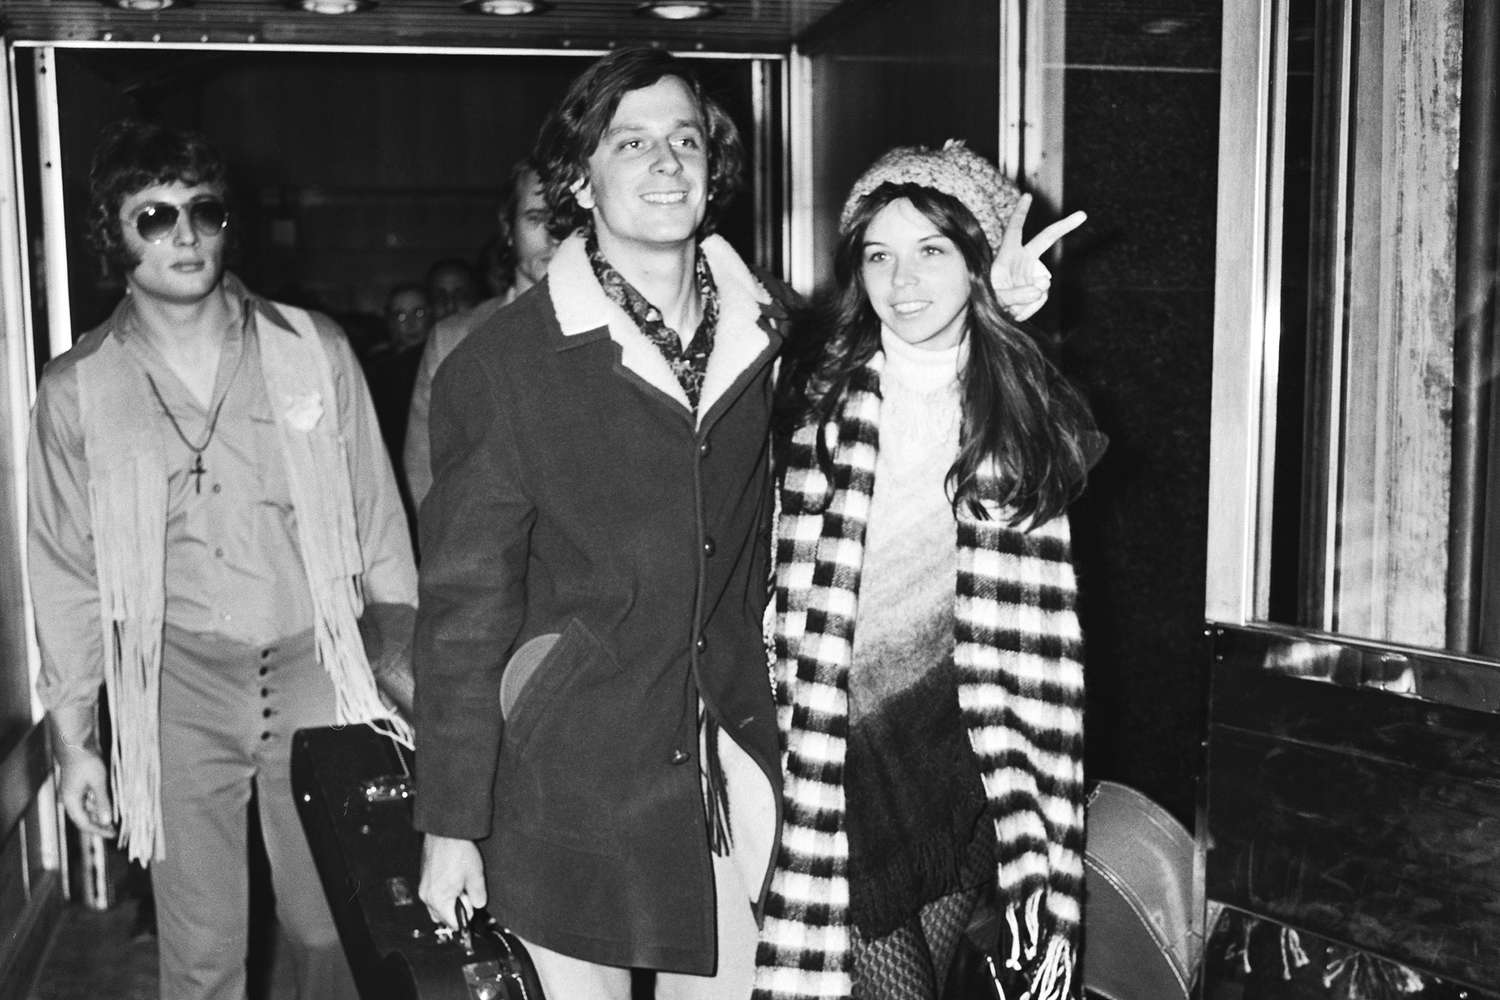 Millionaire Michael James Brody (1948 - 1973) with his new wife Renee at London Airport, 28th January 1970.